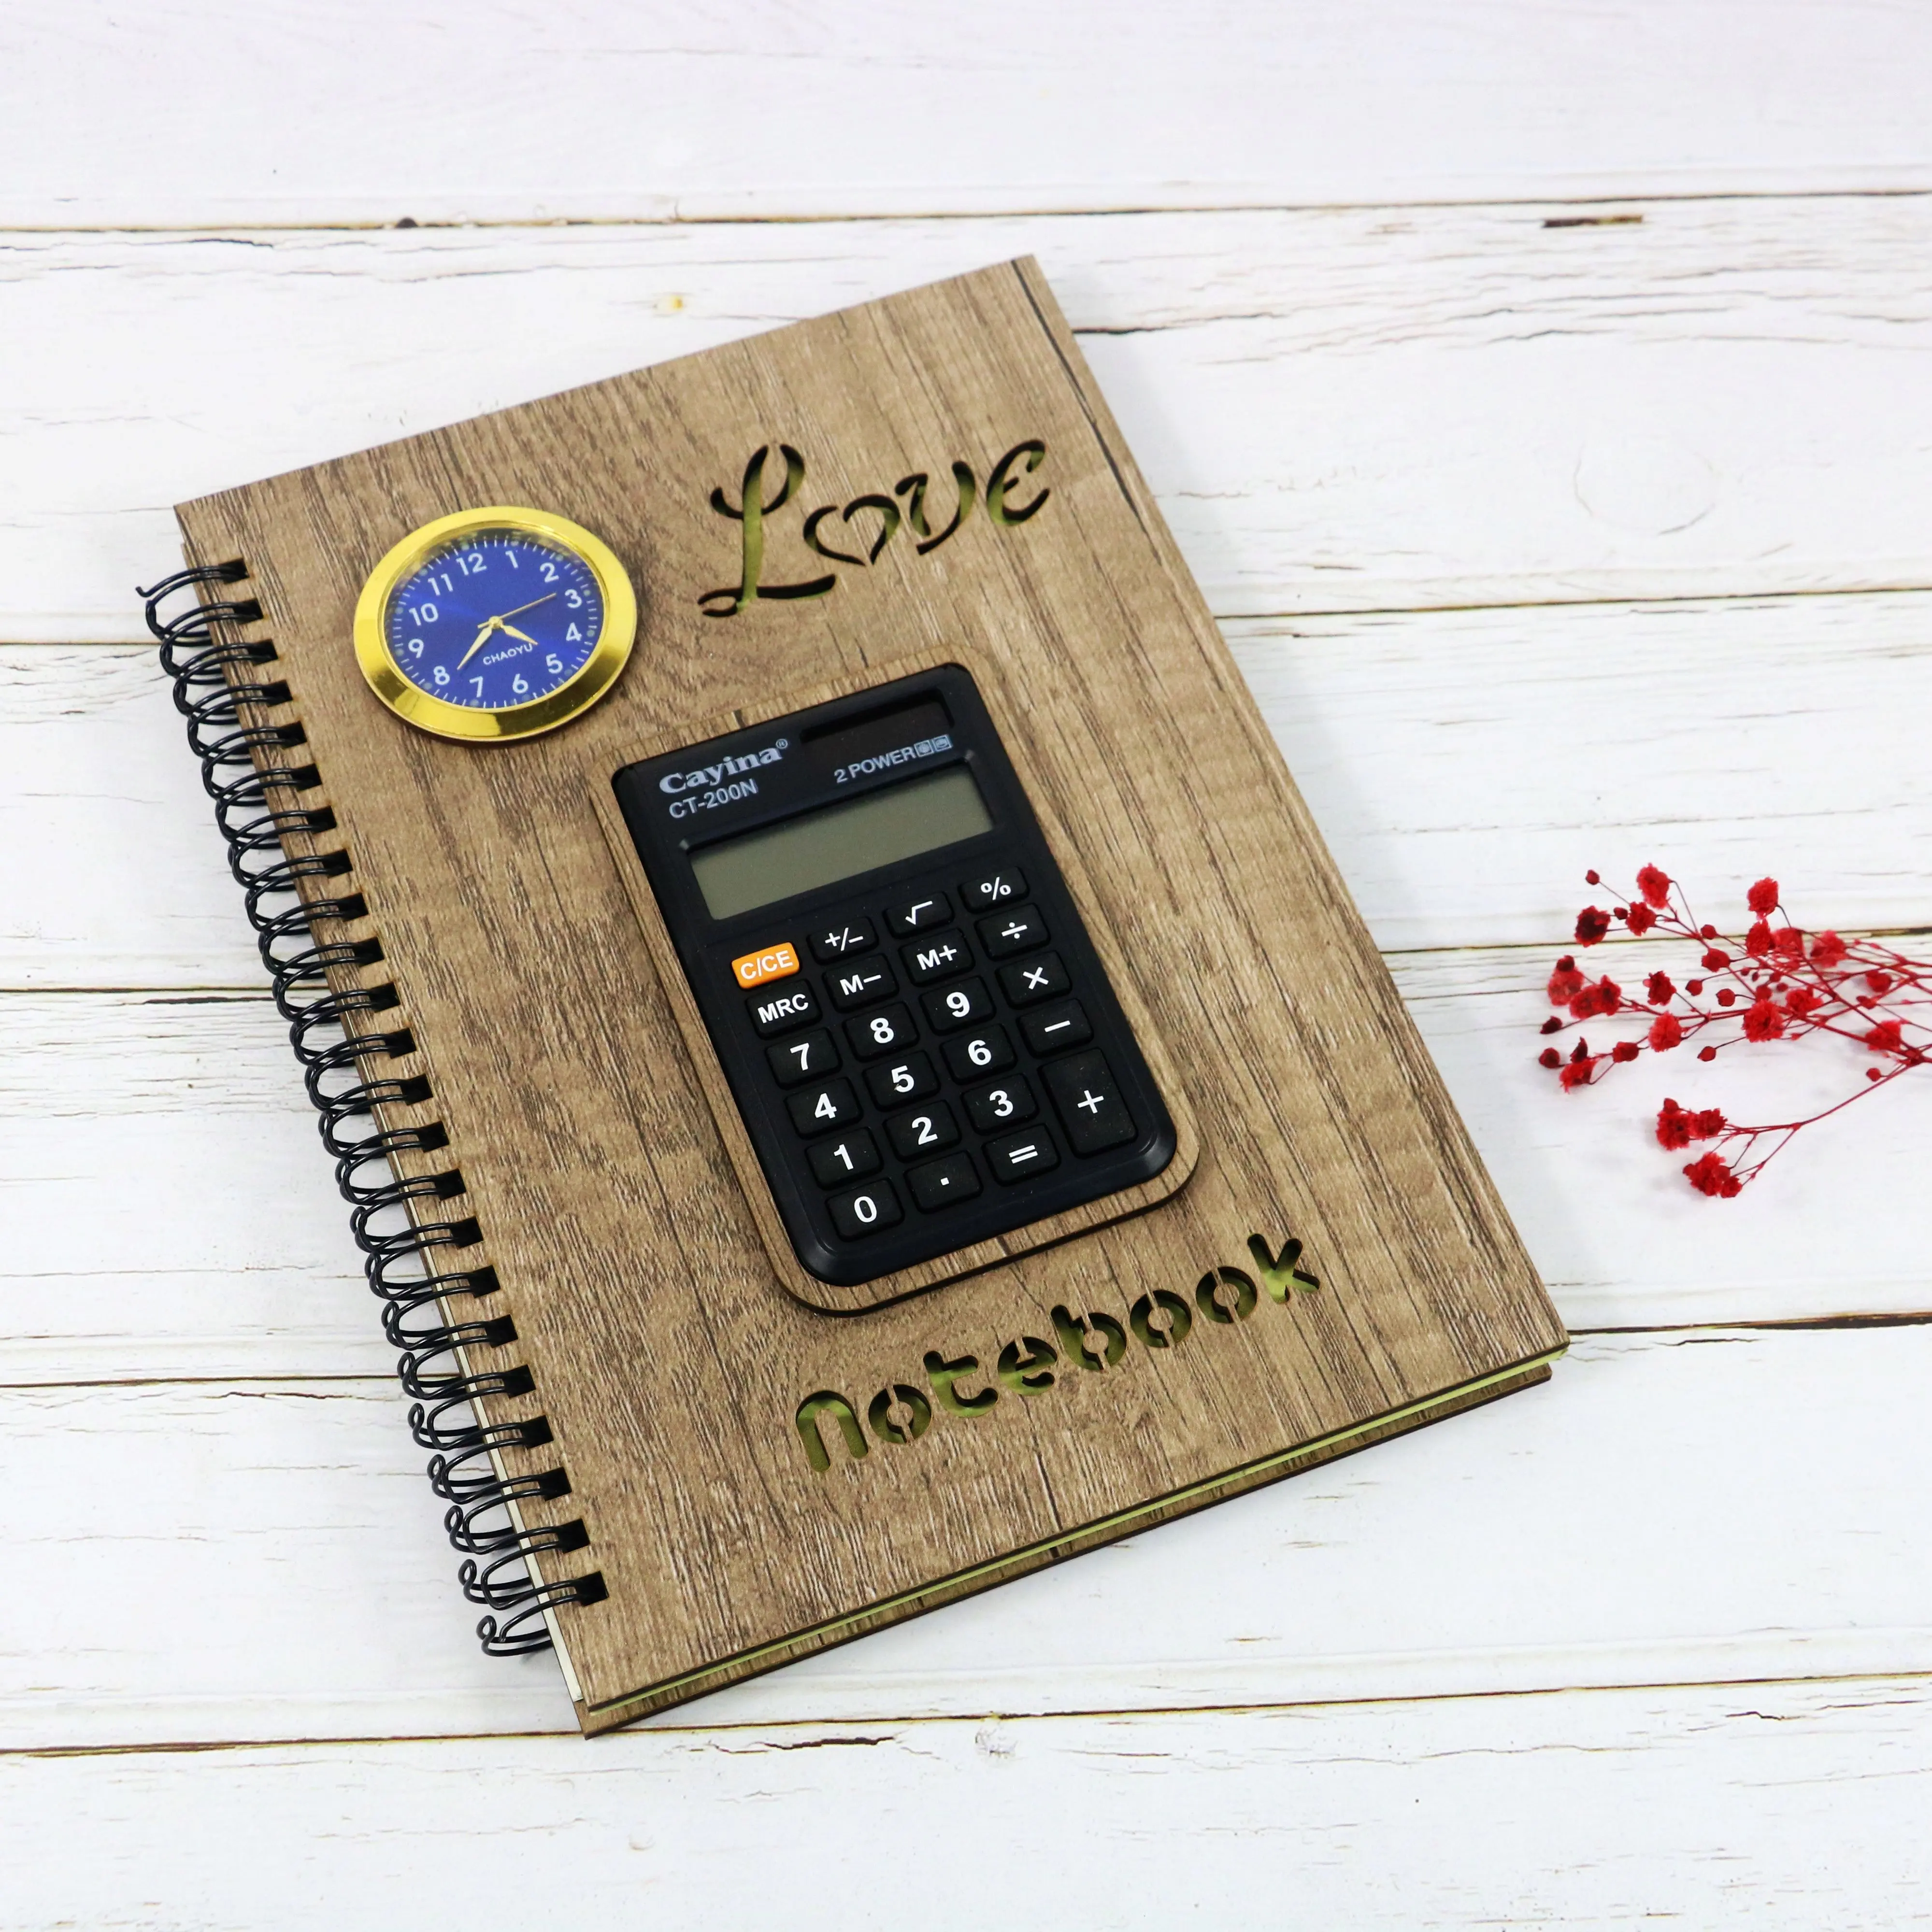 A5 SMART Notebook with calculator and clock